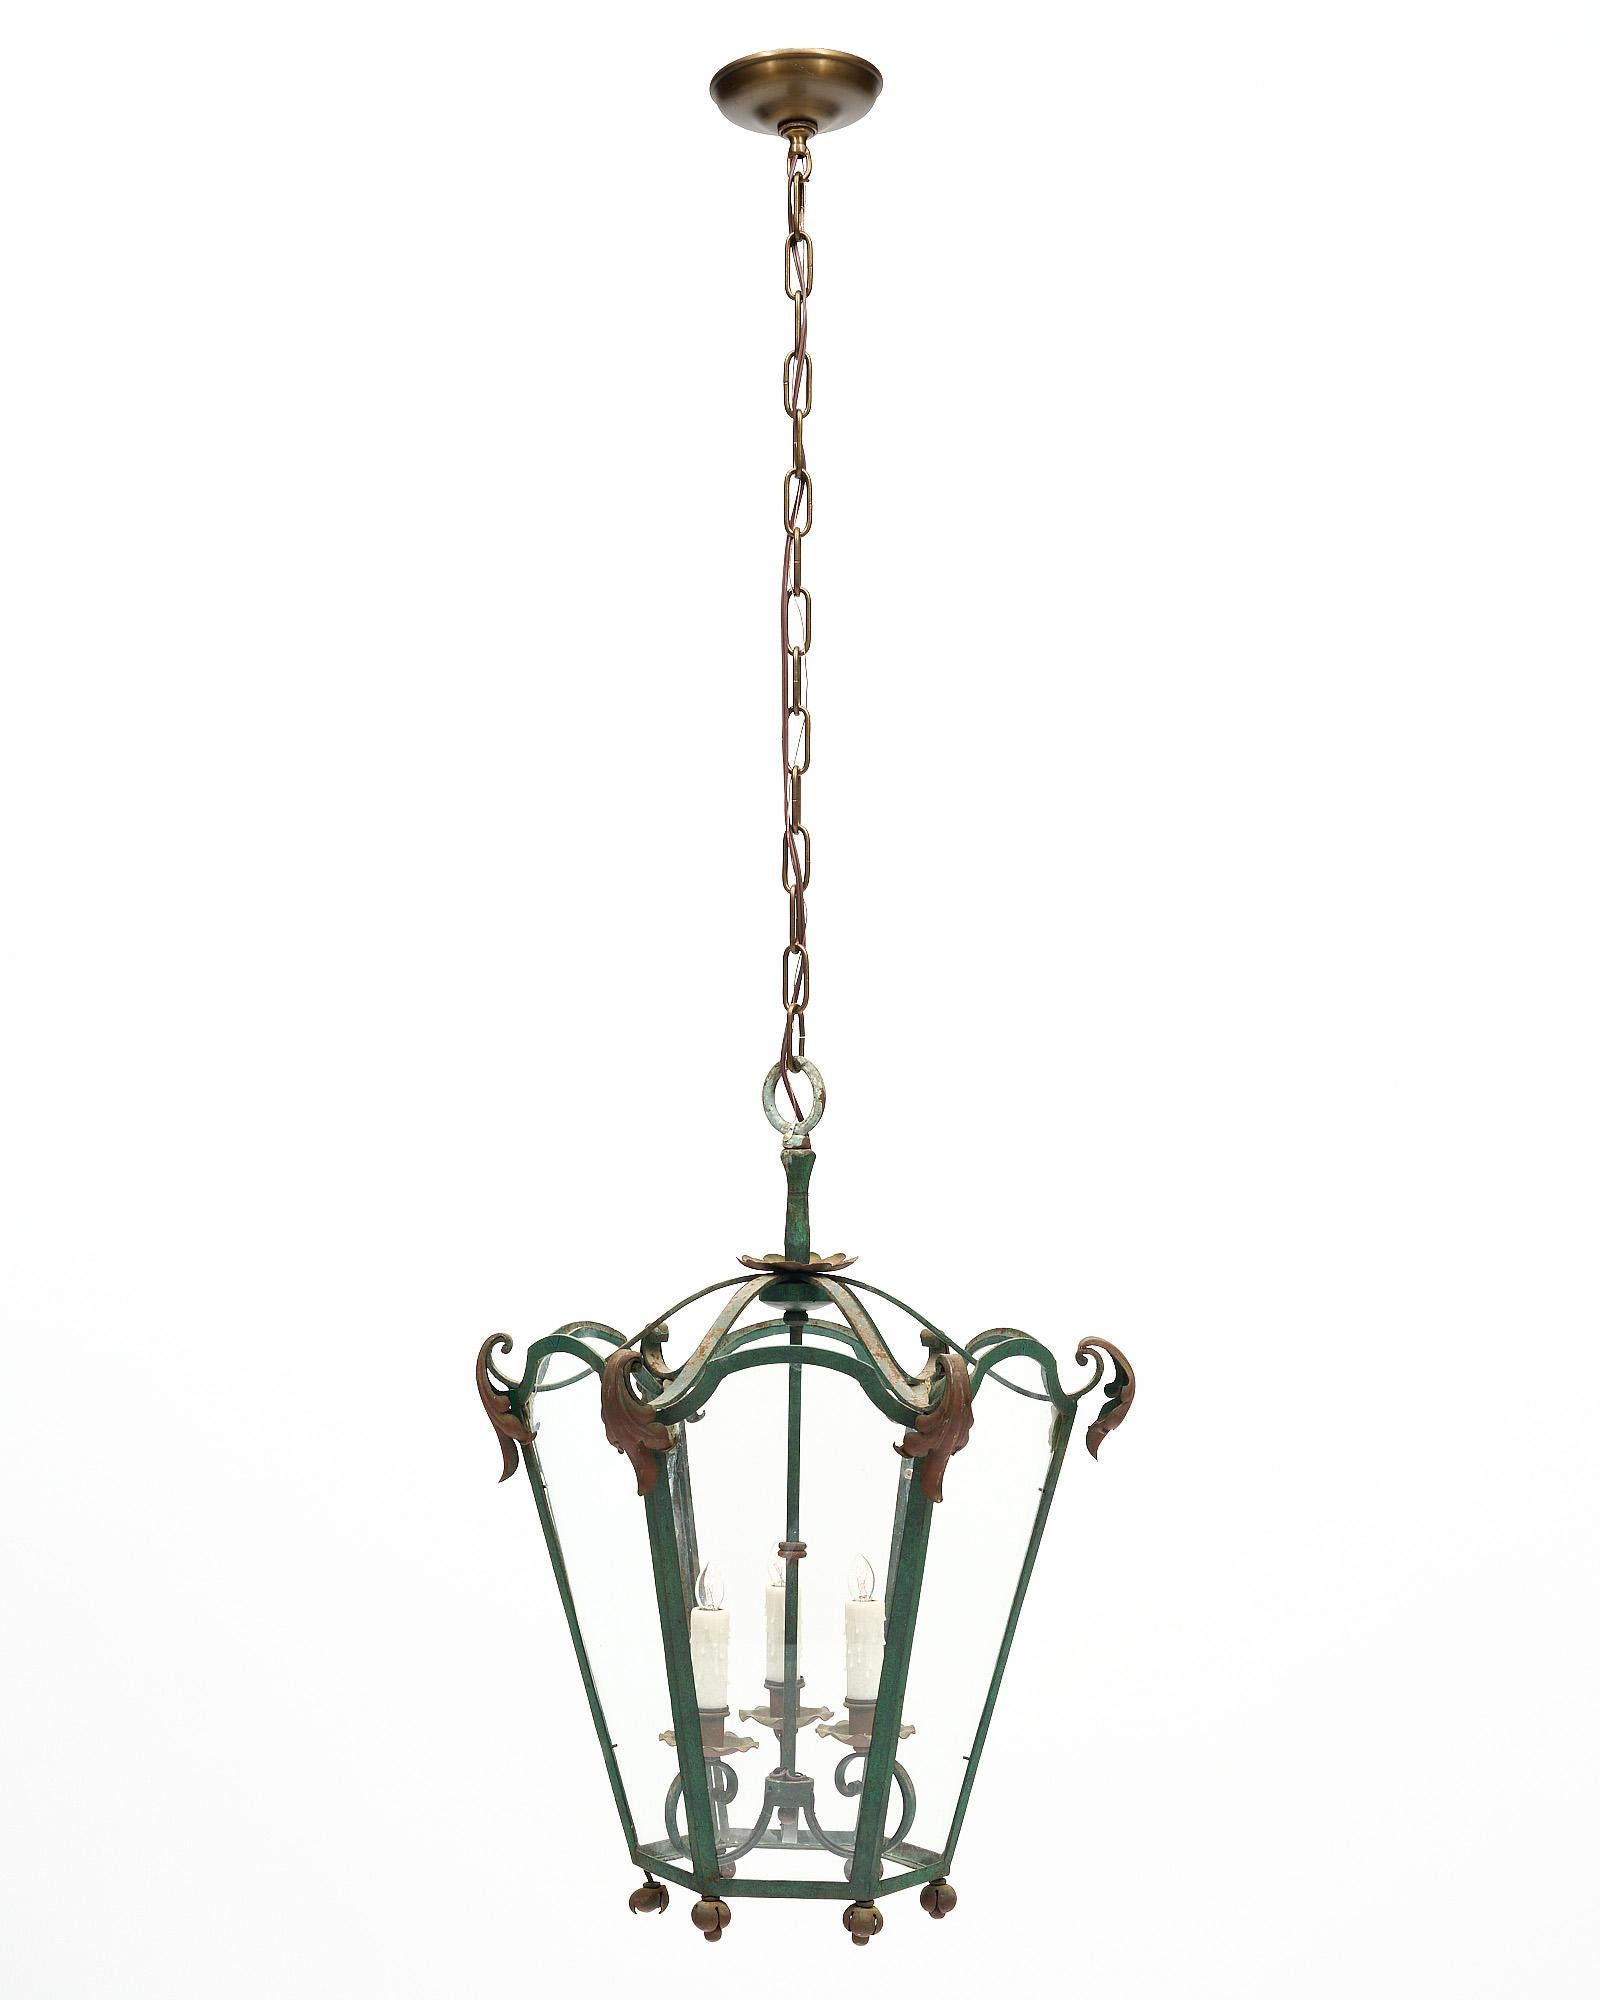 Glass French Vintage Iron Lantern For Sale